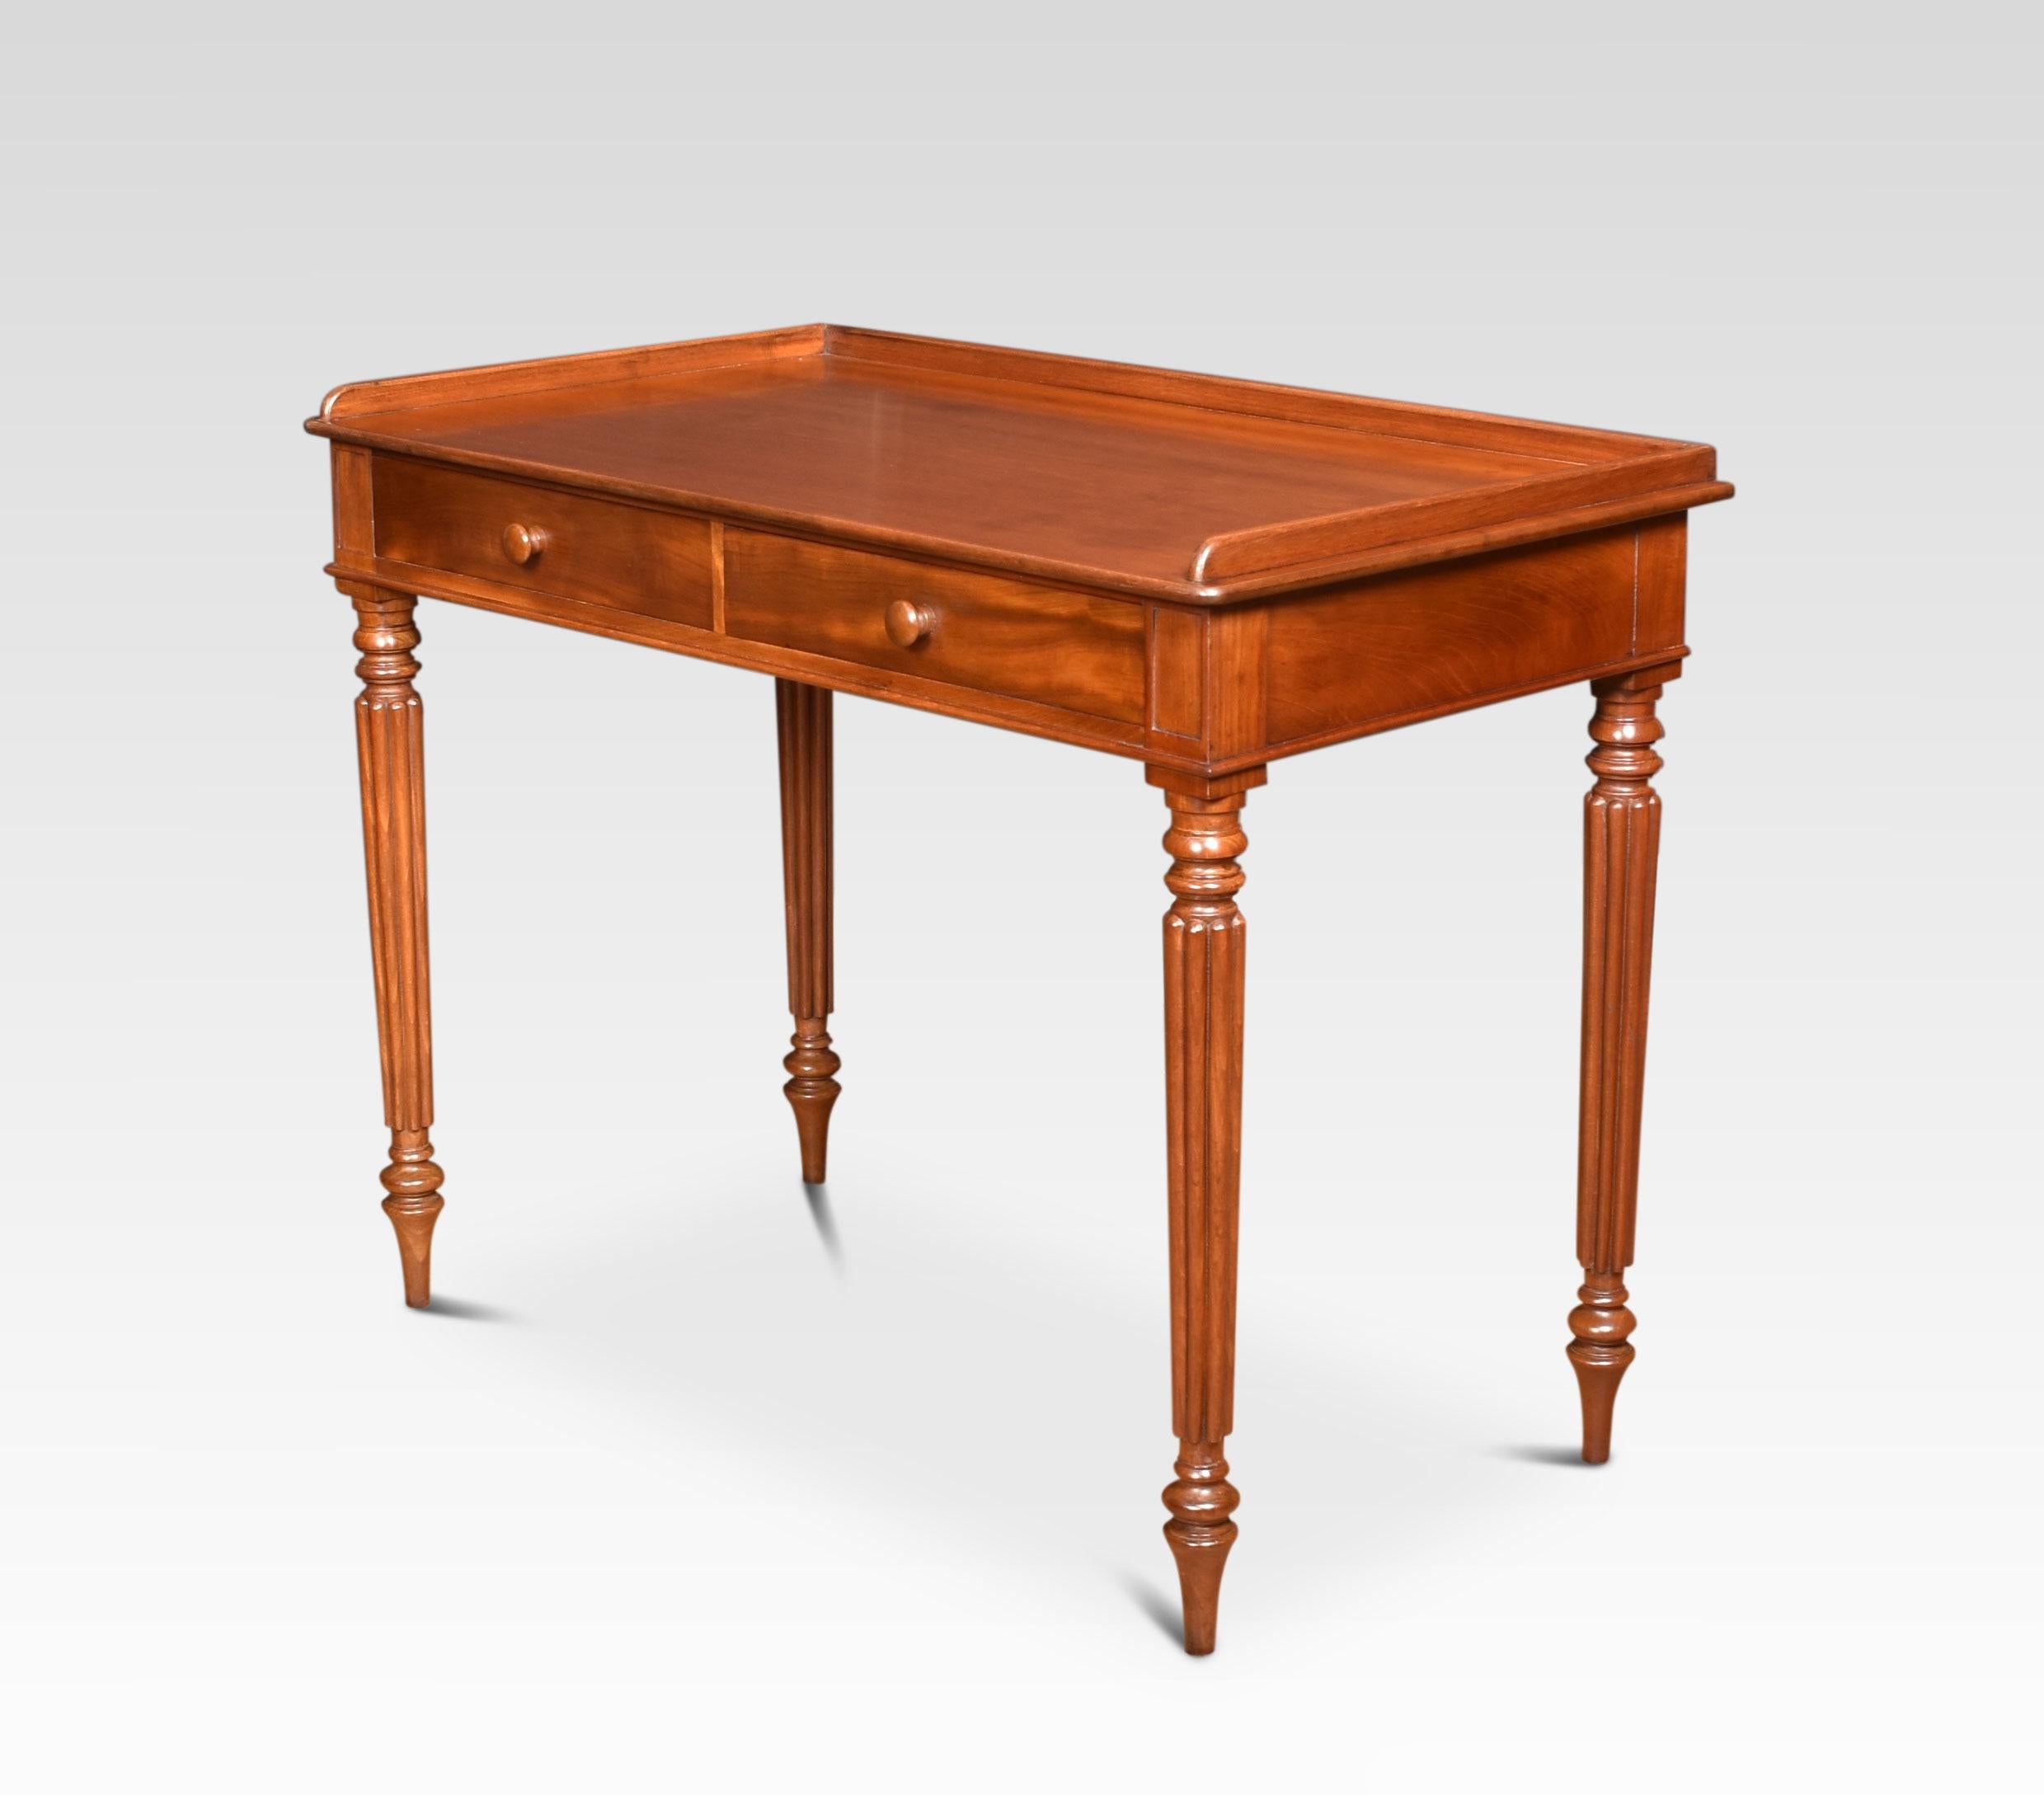 19th century writing table, having a large mahogany top with raised three-quarter gallery above two frieze drawers with turned knobs. All raised up on turned tapered reeded legs.
Dimensions:
Height 31.5 Inches
Width 40 Inches
Depth 22 Inches.